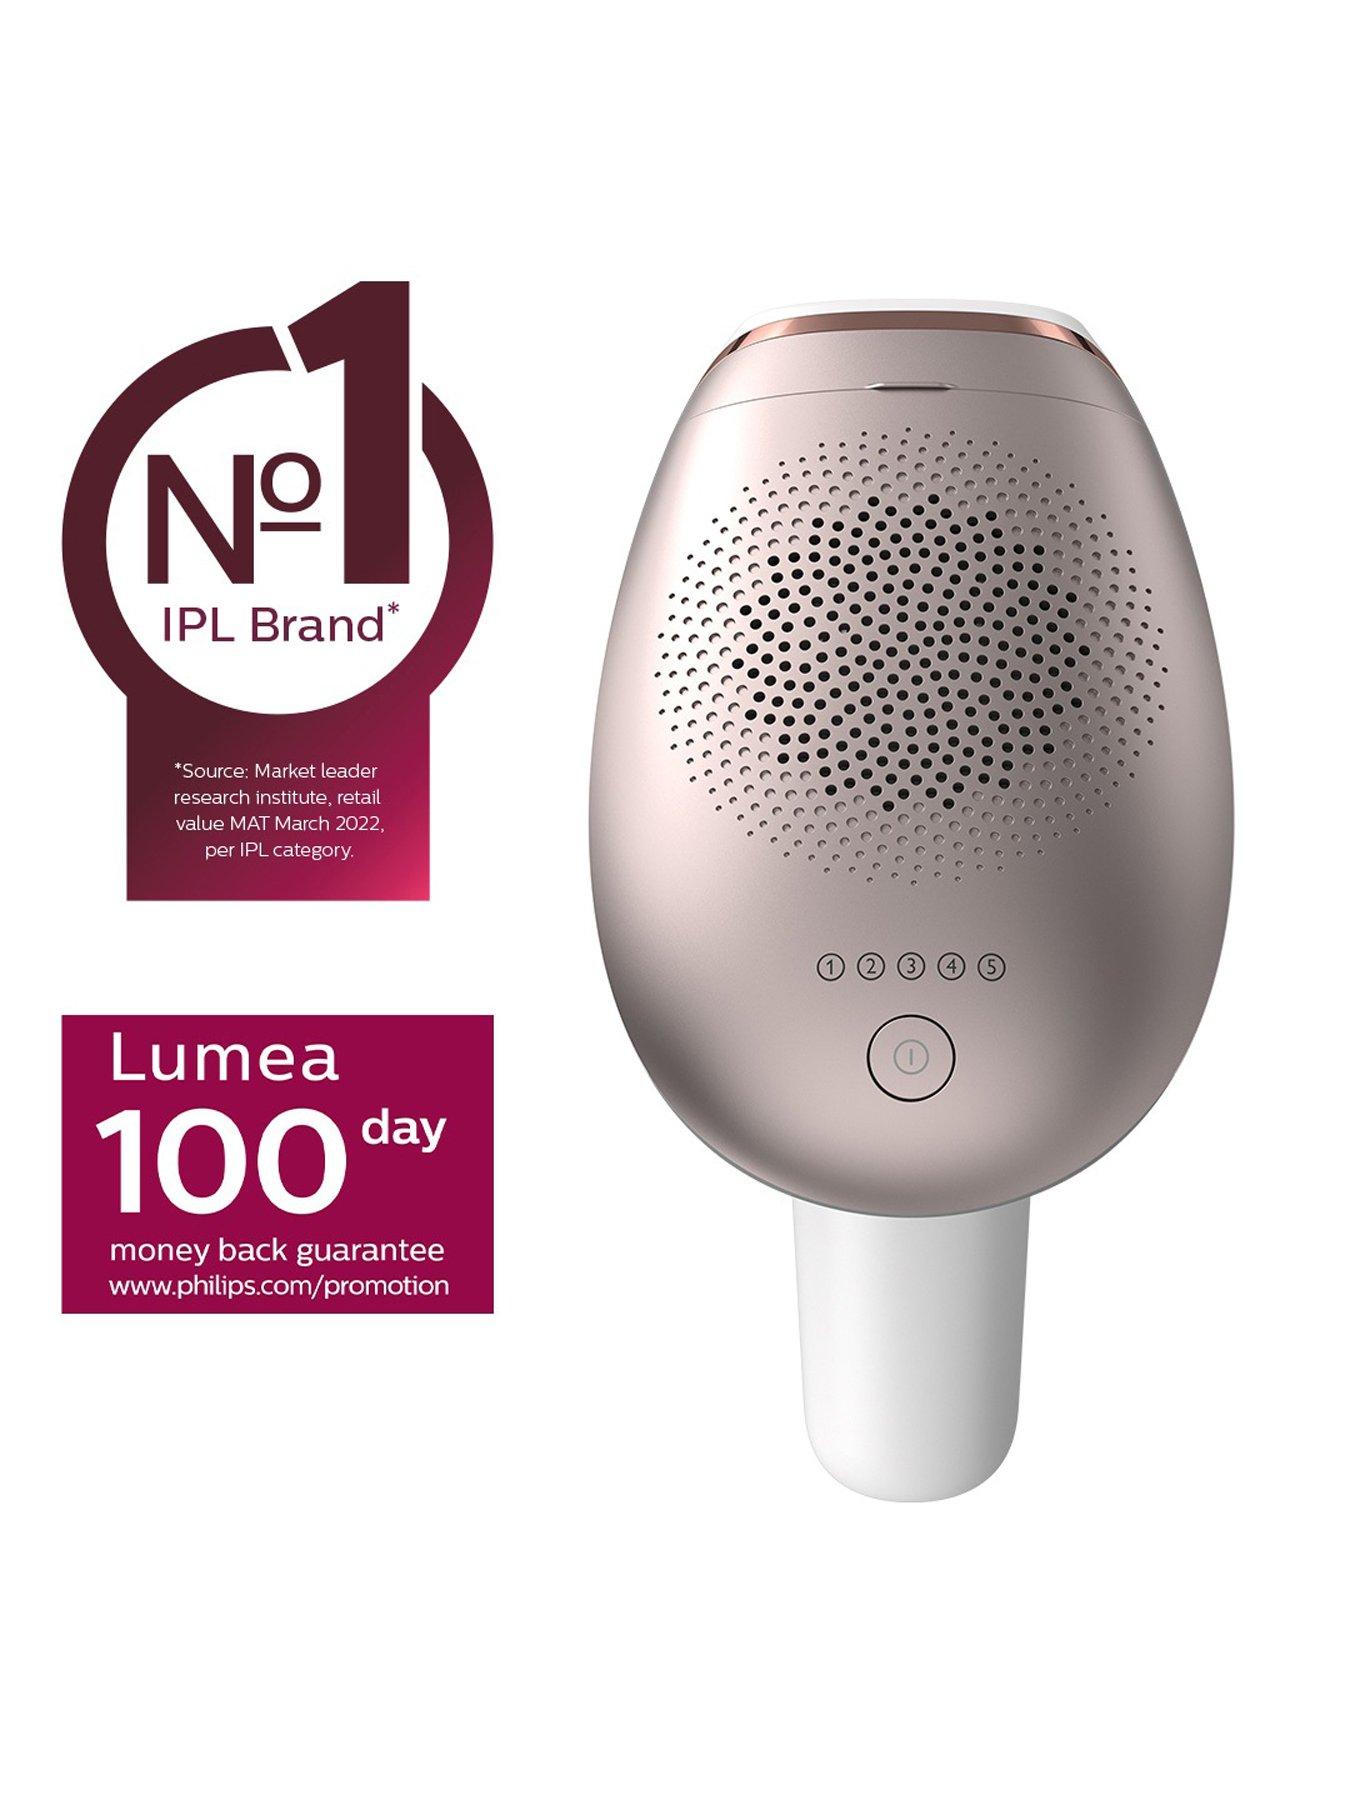 Philips Lumea IPL 7000 Series, corded with 3 attachments for Body, Face and  Bikini with pen trimmer - BRI923/00